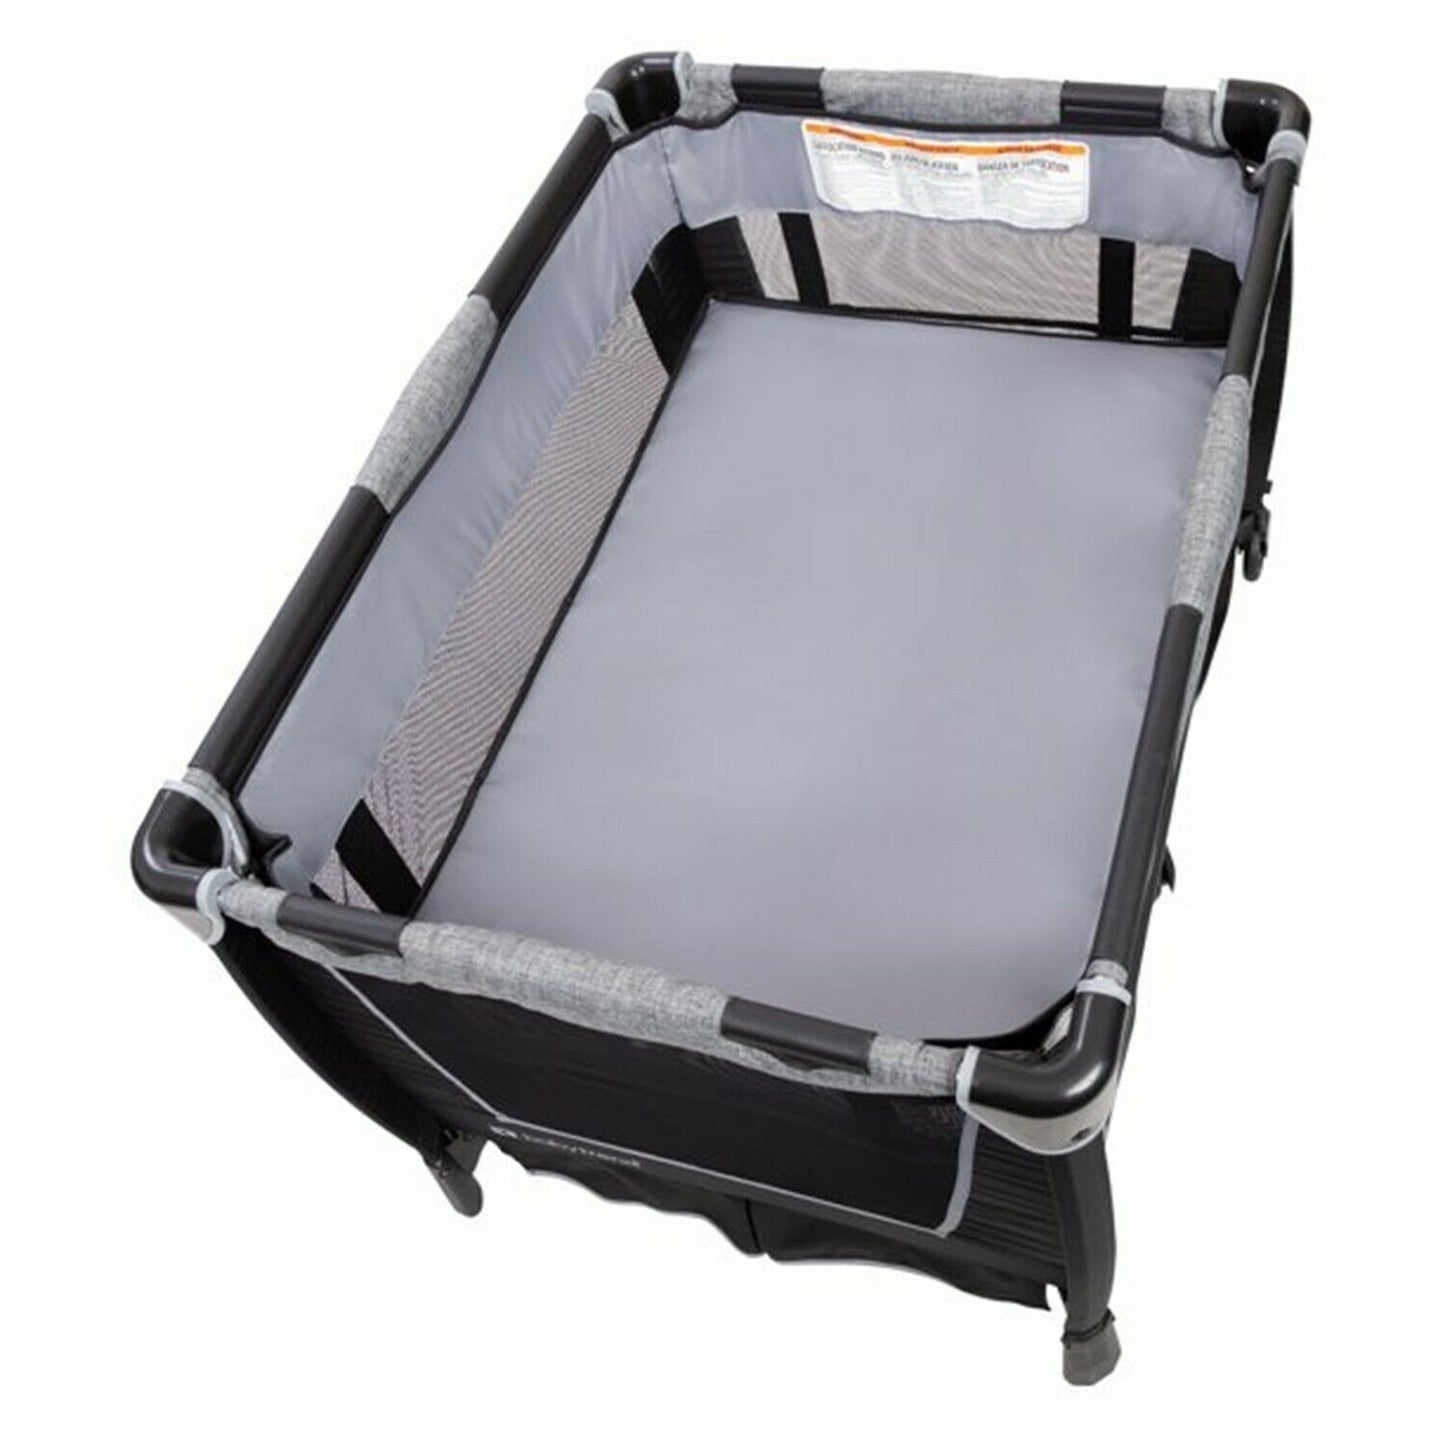 Baby Stroller Travel System with Car Seat Infant Playard Newborn Combo - Black